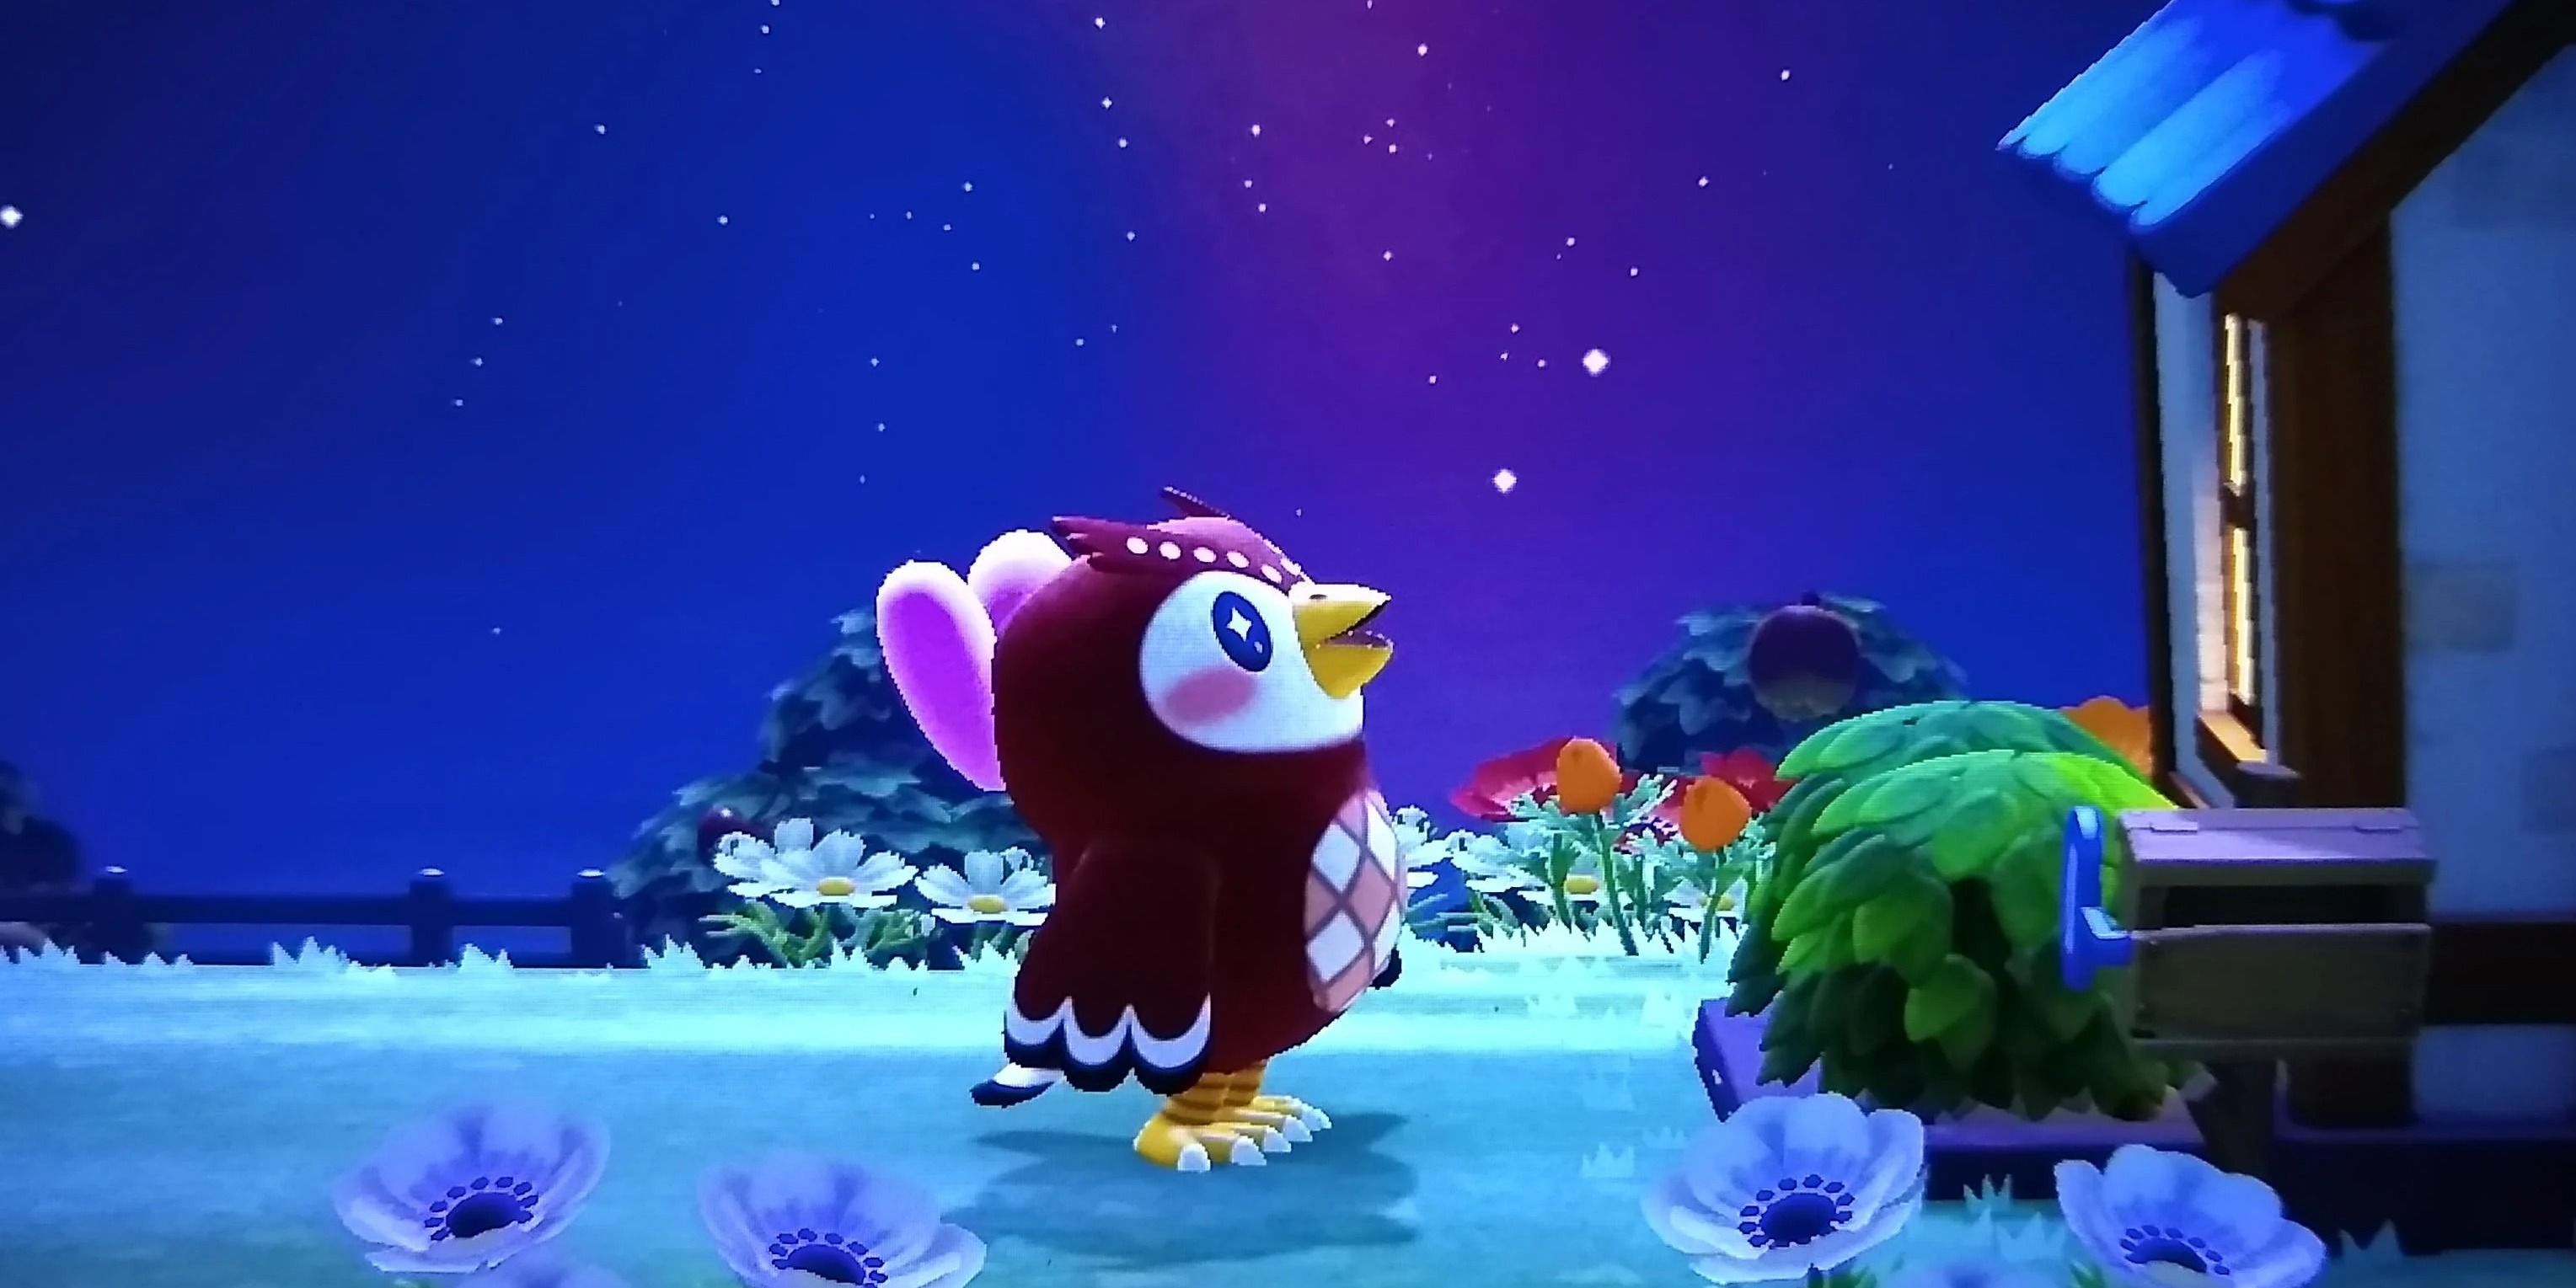 Celeste from Animal Crossing: New Horizons looking up at the starry sky.